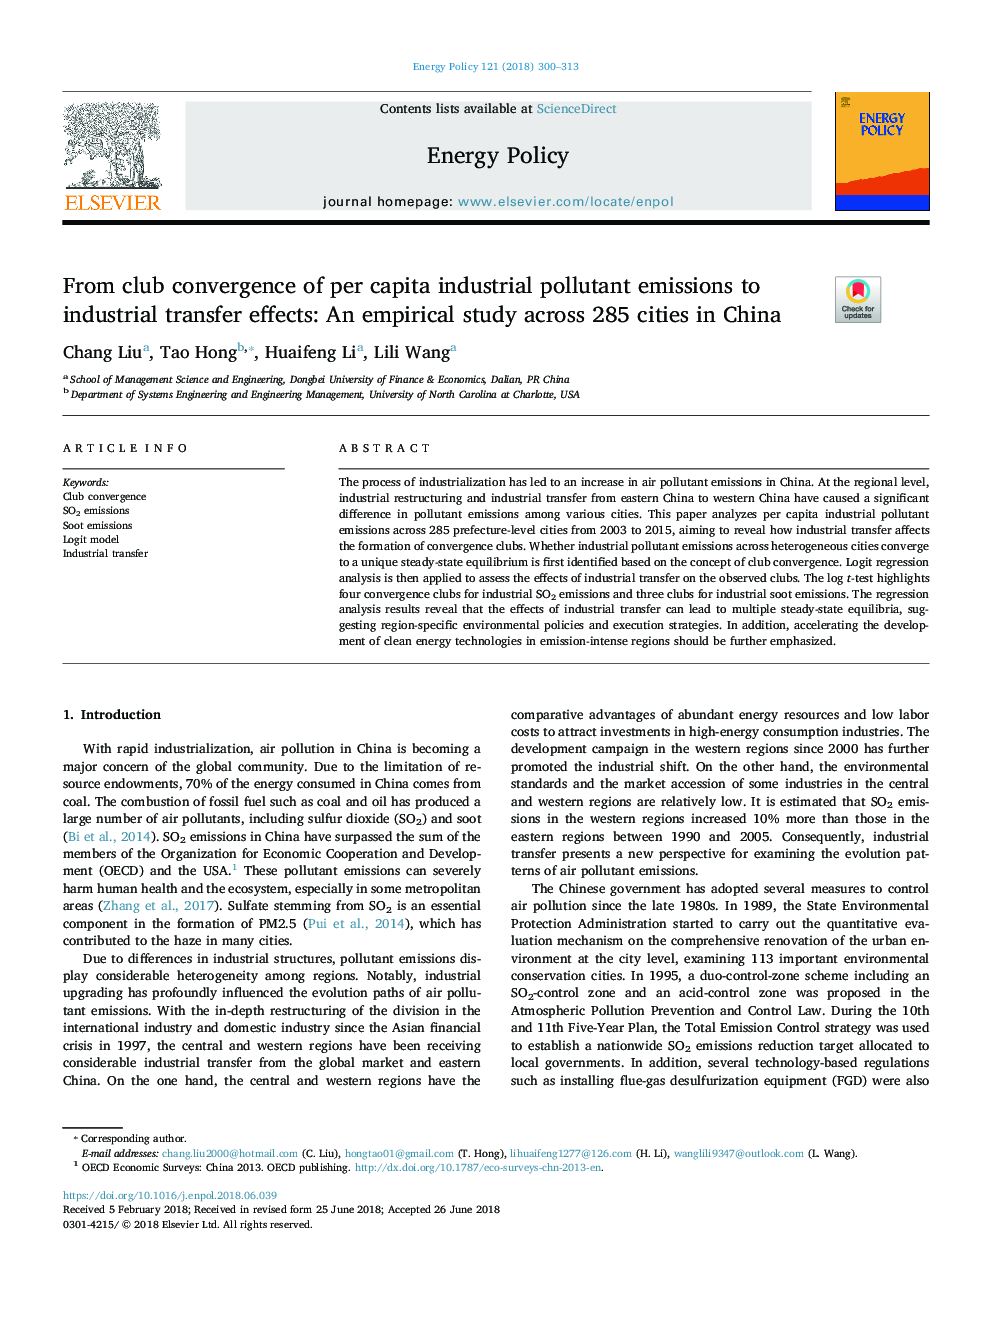 From club convergence of per capita industrial pollutant emissions to industrial transfer effects: An empirical study across 285 cities in China